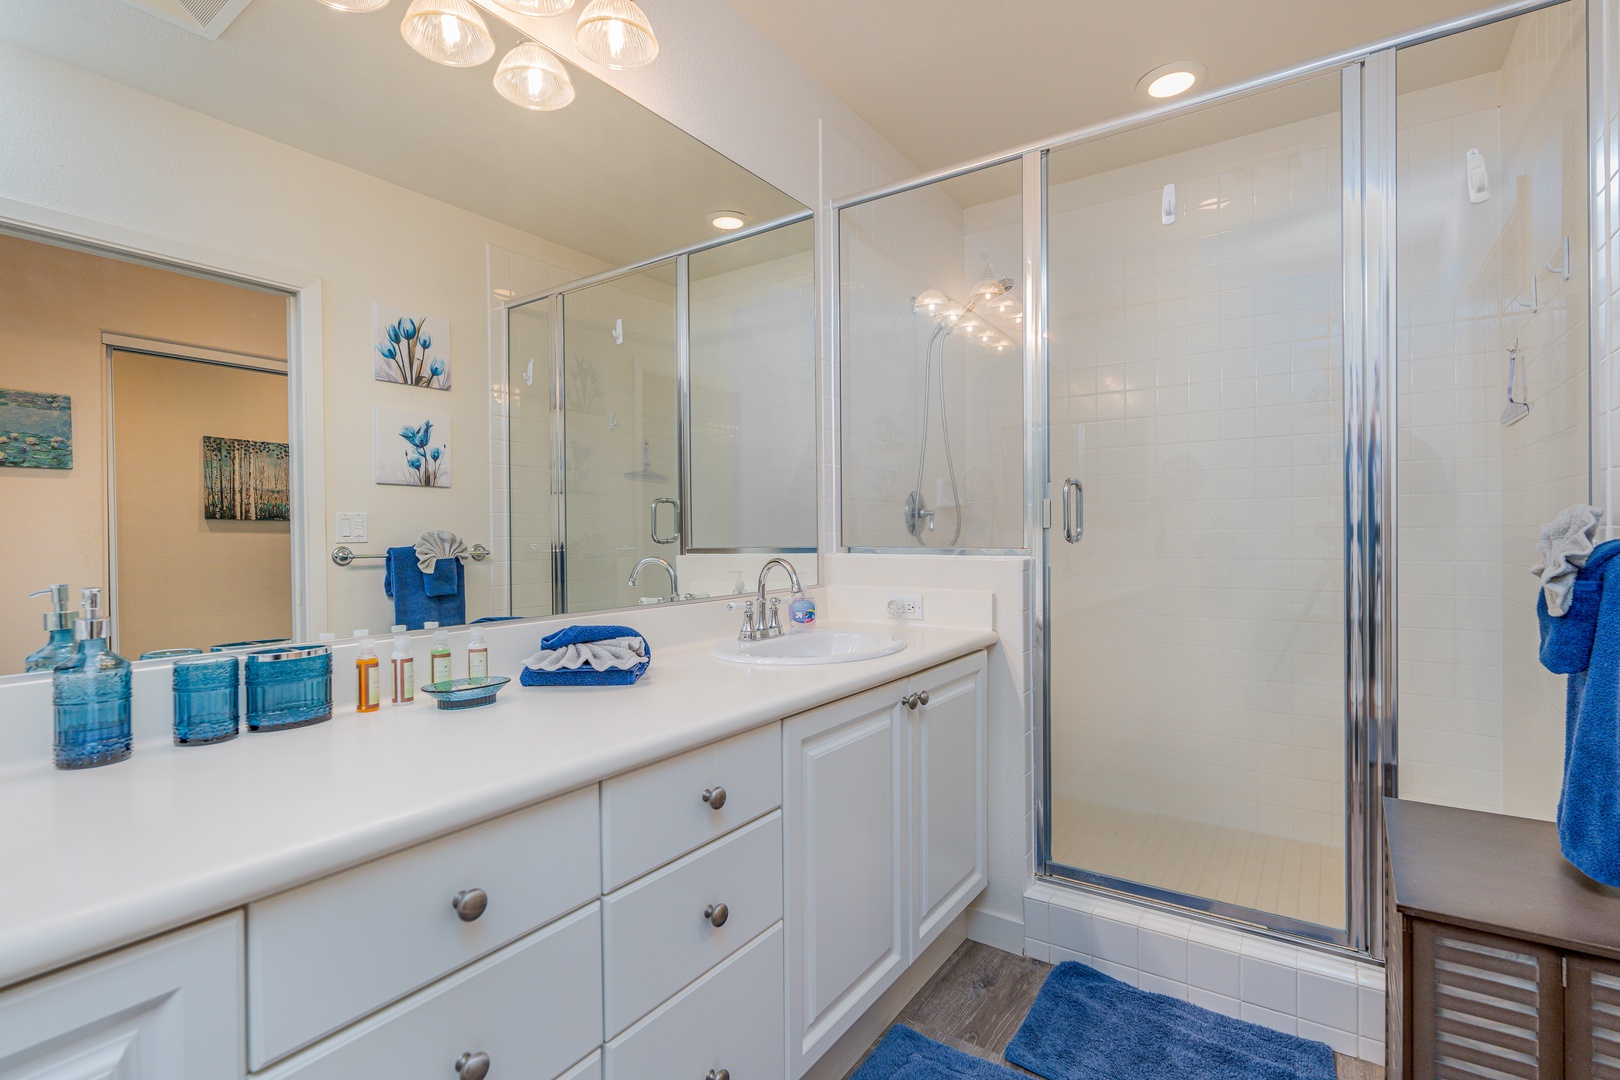 Kapolei Vacation Rentals, Coconut Plantation 1208-2 - Unwind in the walk-in shower after a day of vacation.